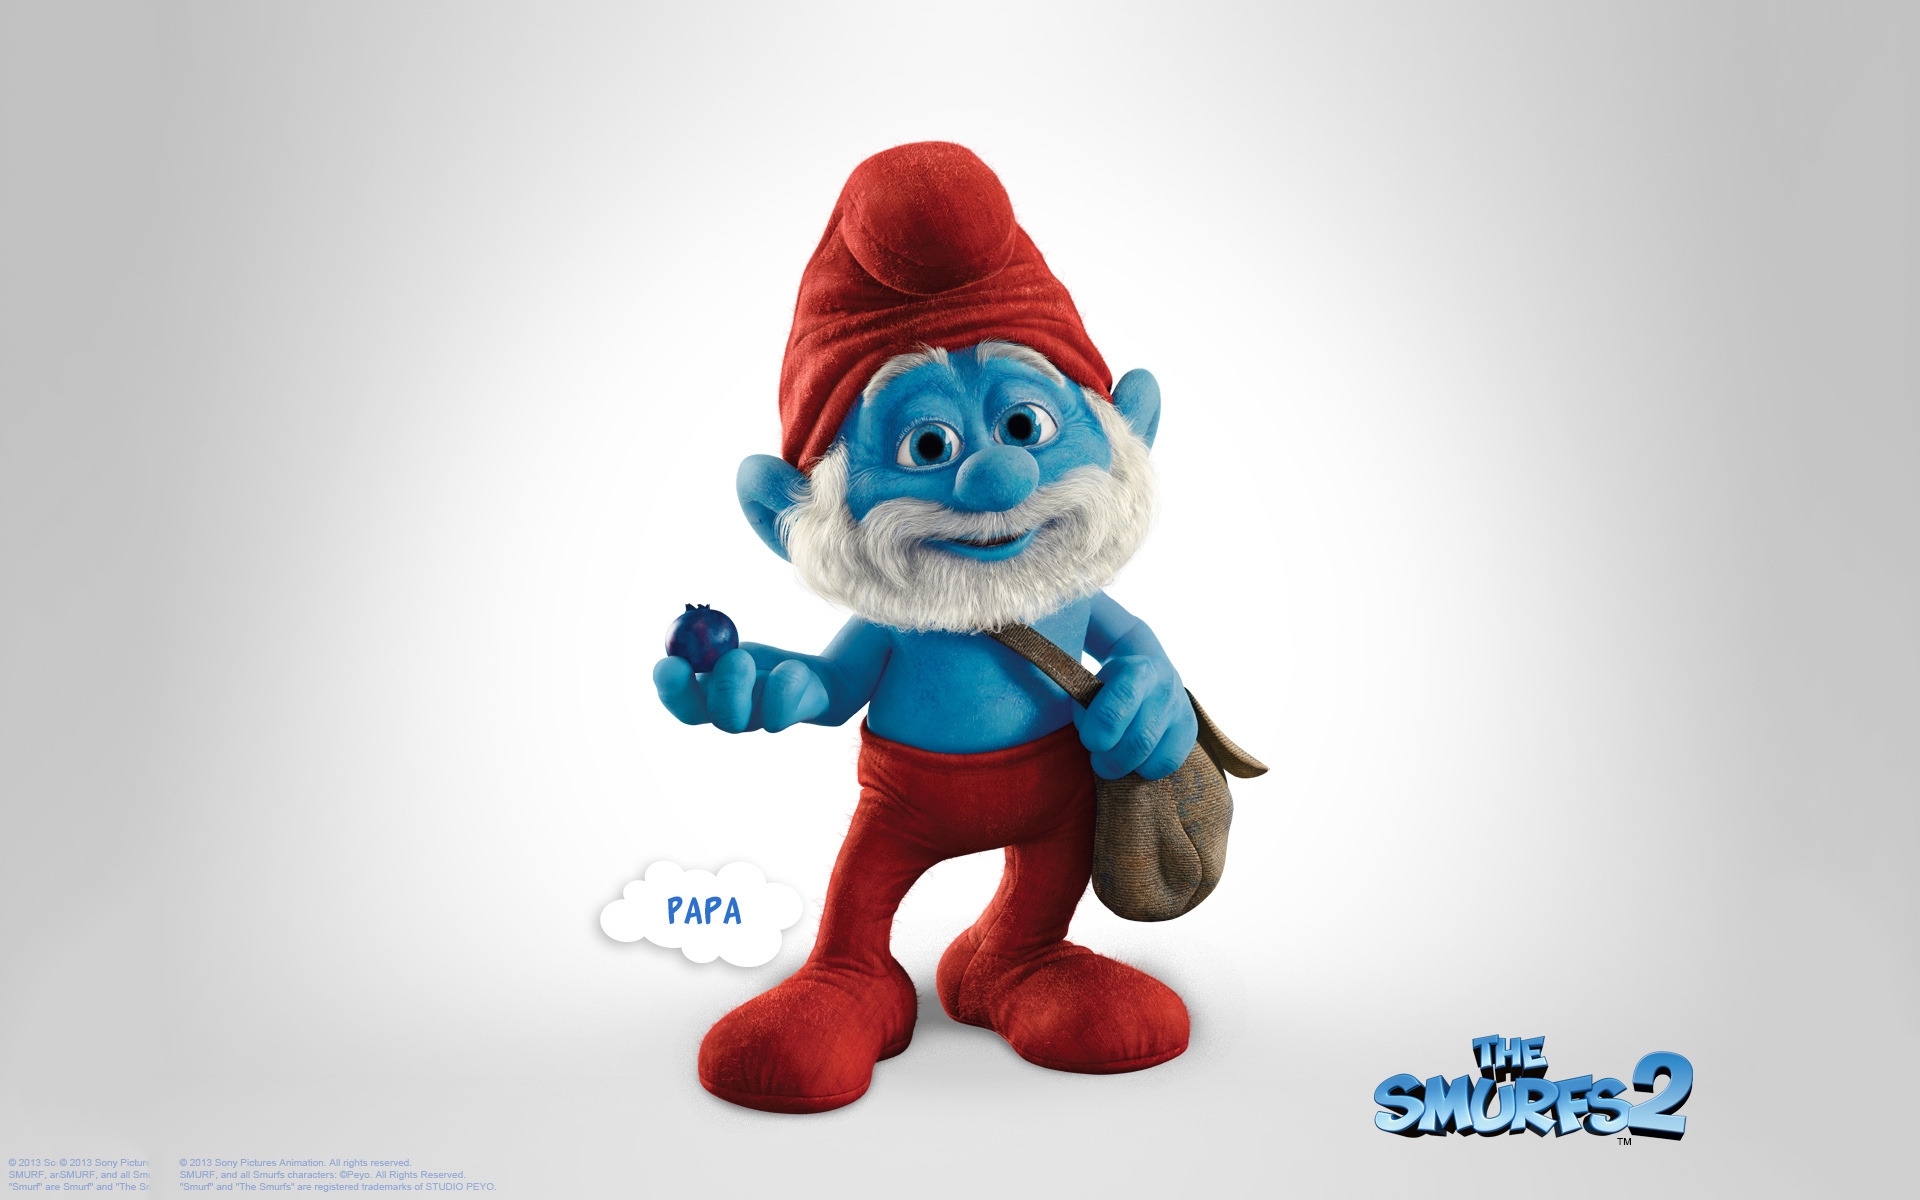 Papa The Smurfs 2 for 1920 x 1200 widescreen resolution